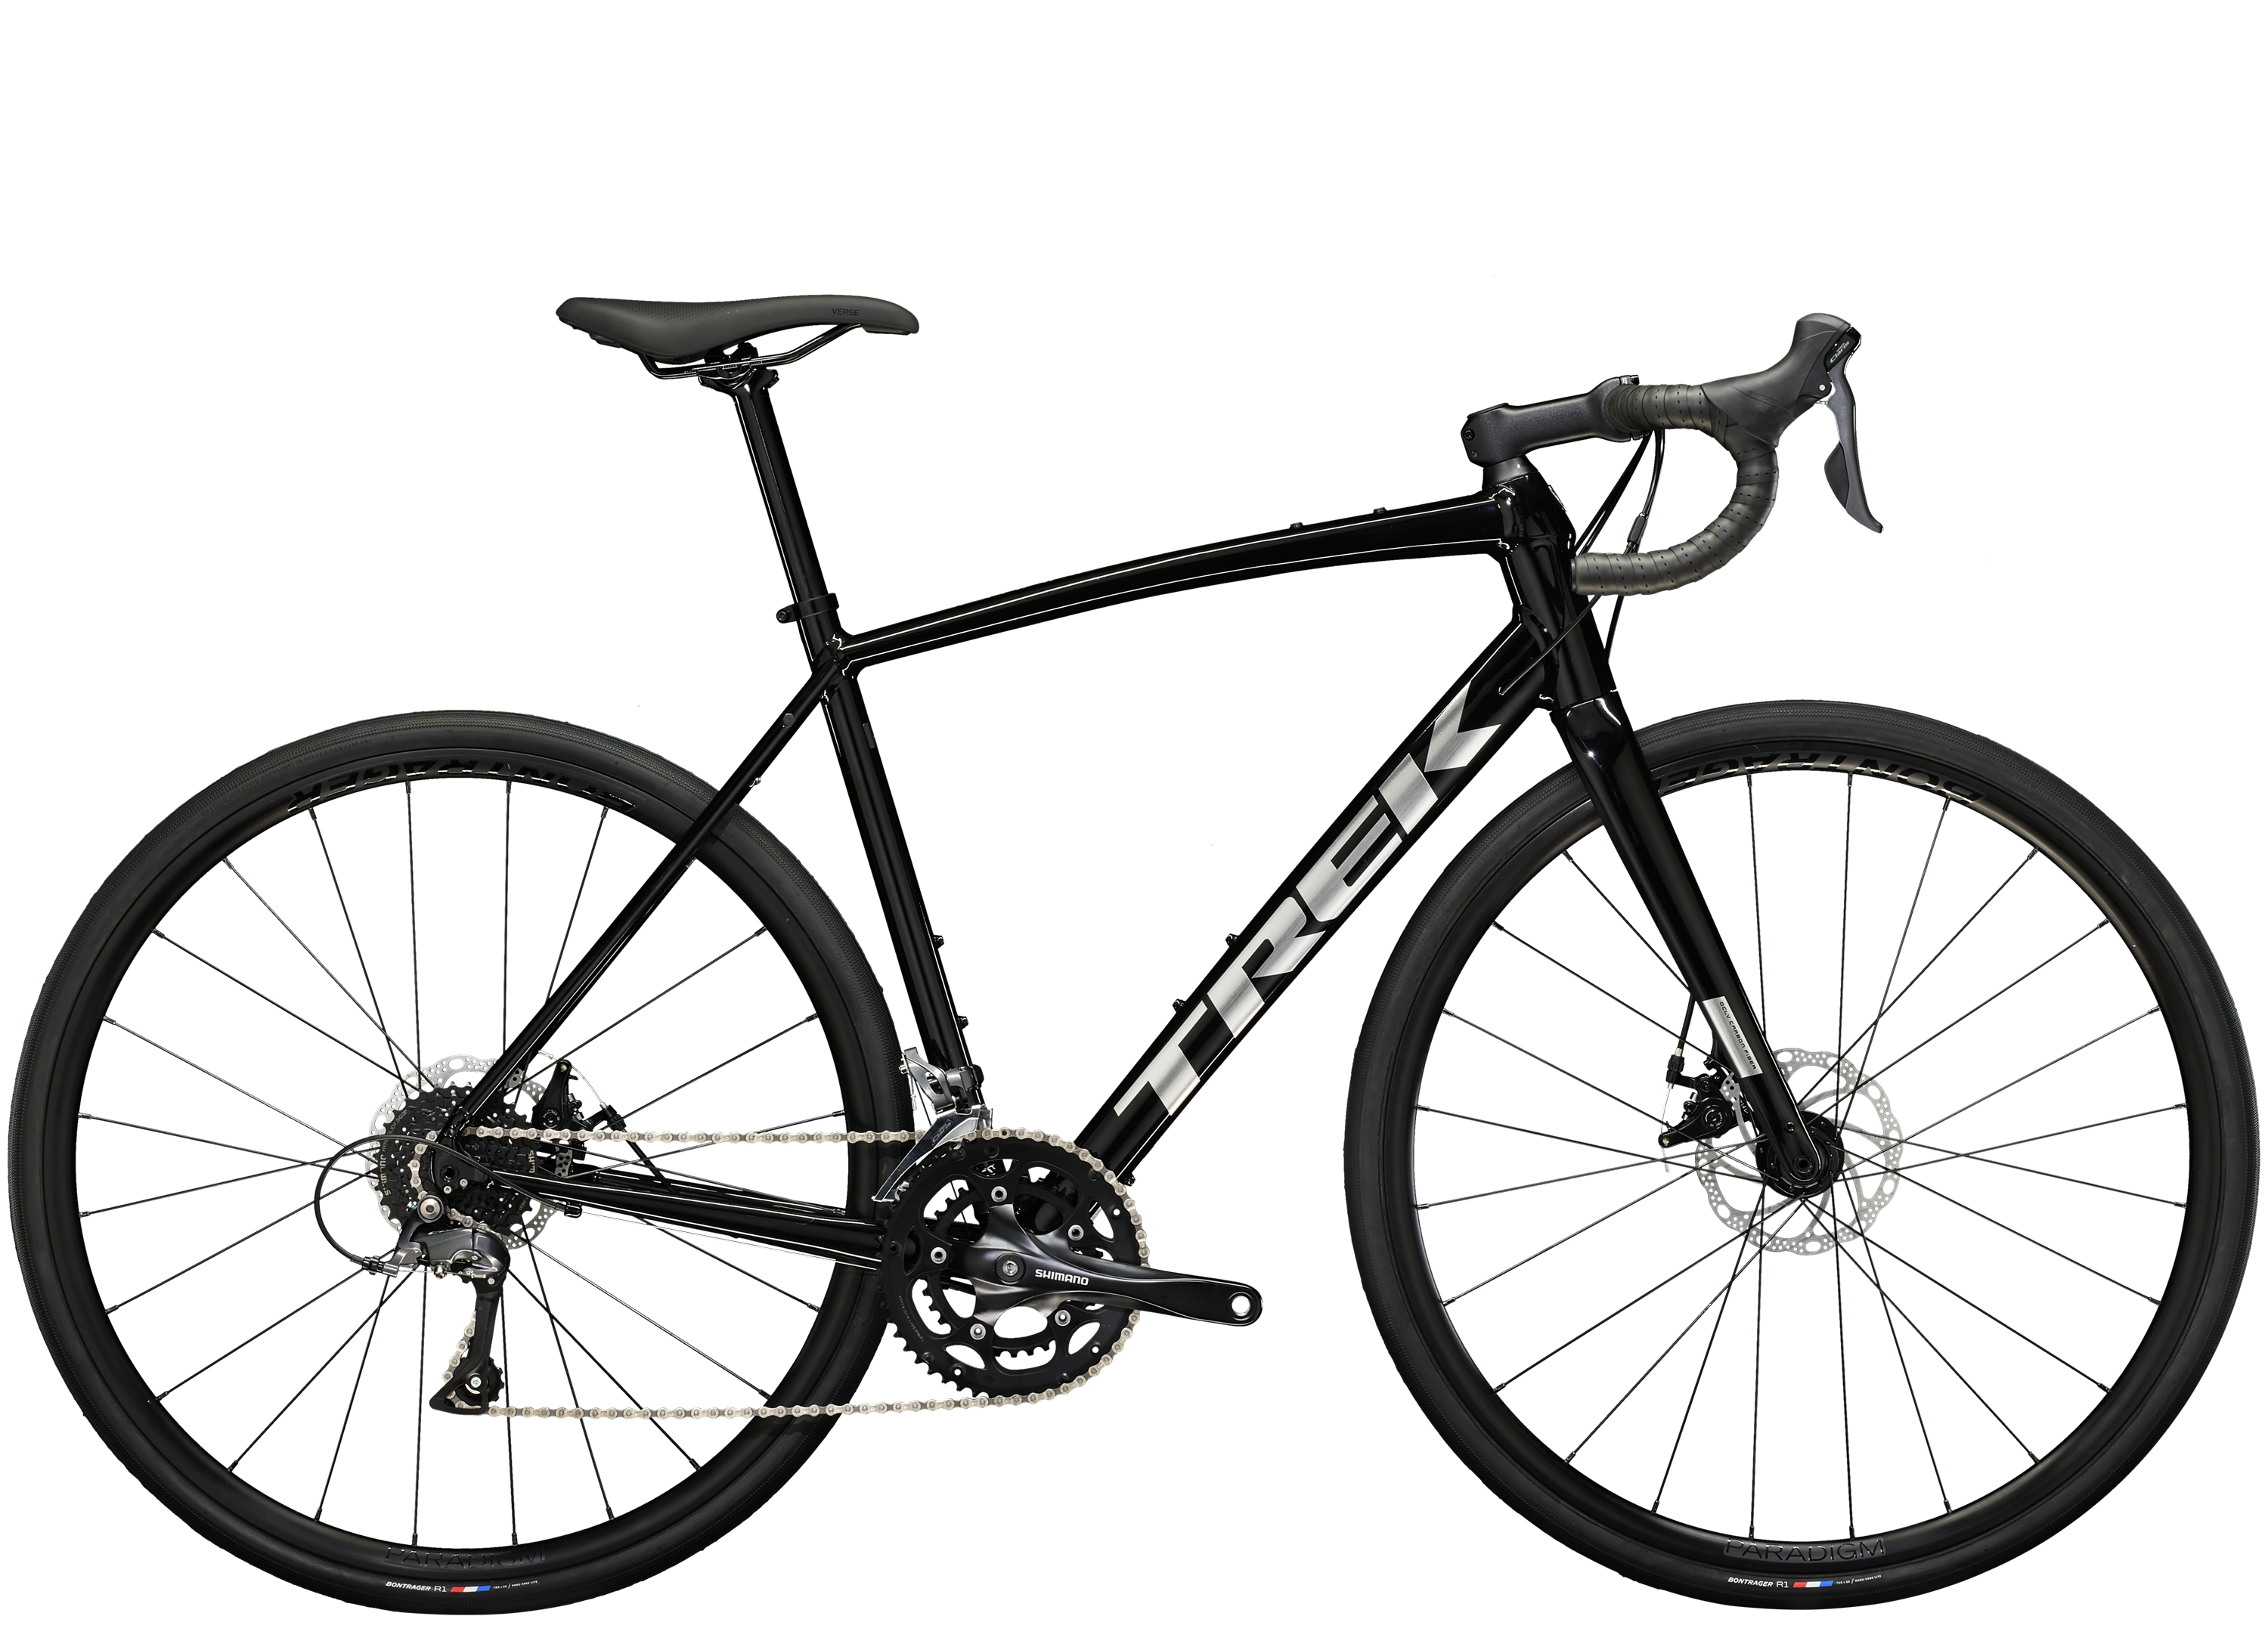 <a href="https://cycles-clement.be/product/domane-al-2-54-trek-black/">DOMANE AL 2 54 TREK BLACK</a>